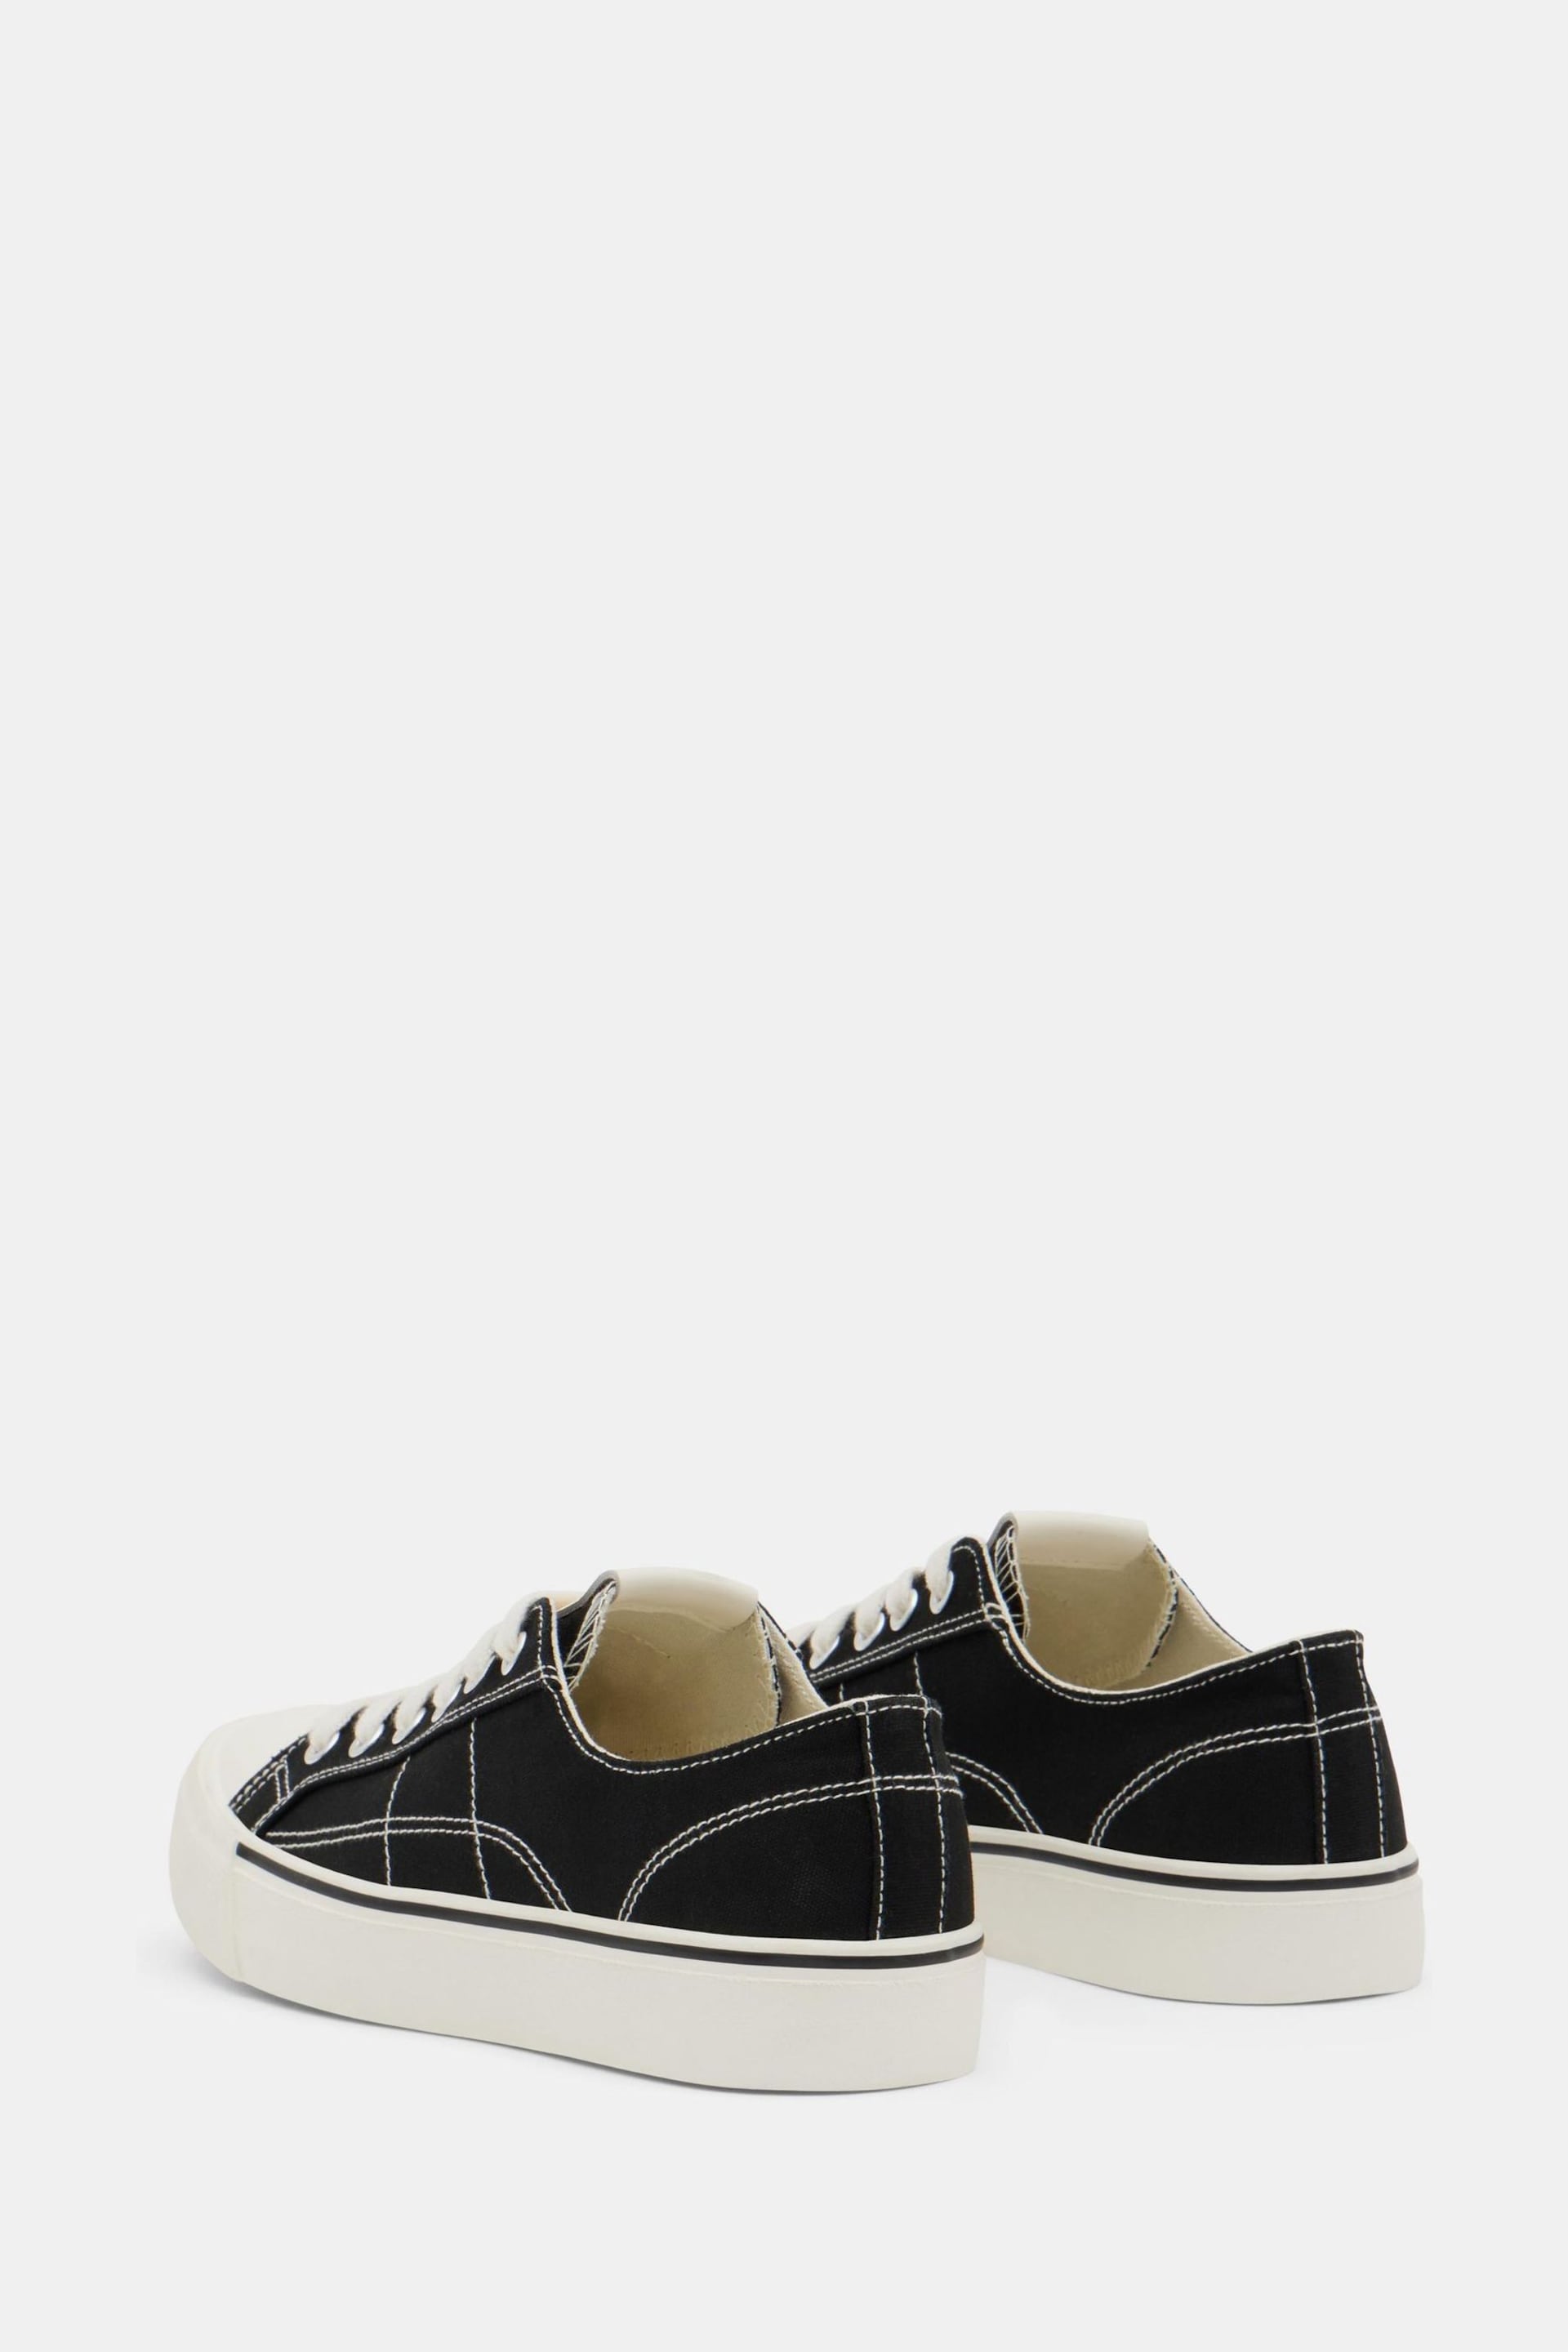 Hush Black Finley Canvas Trainers - Image 3 of 5